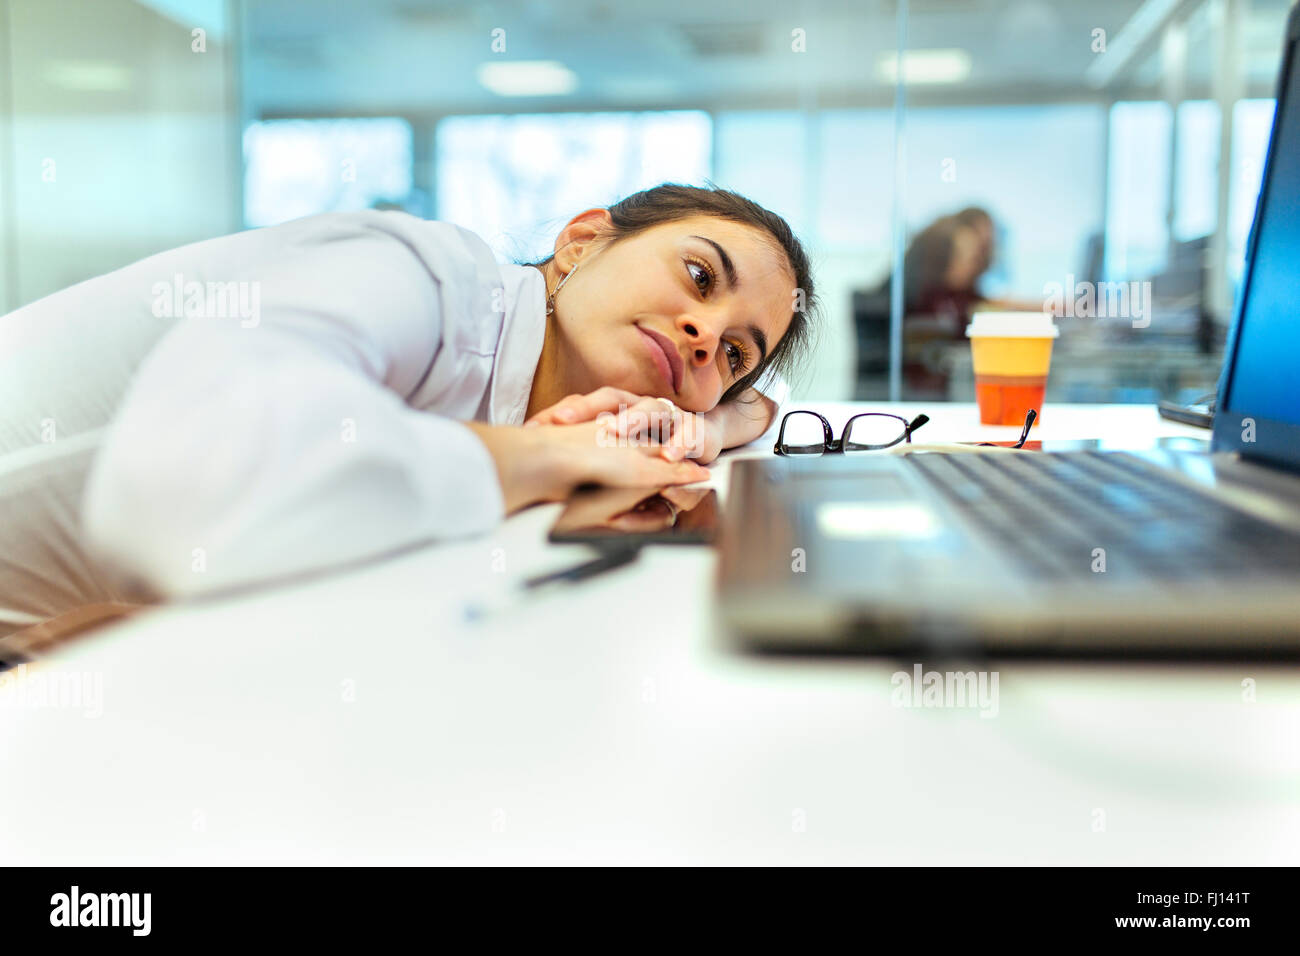 Young Woman Boring At Her Desk In An Office Stock Photo 97140788